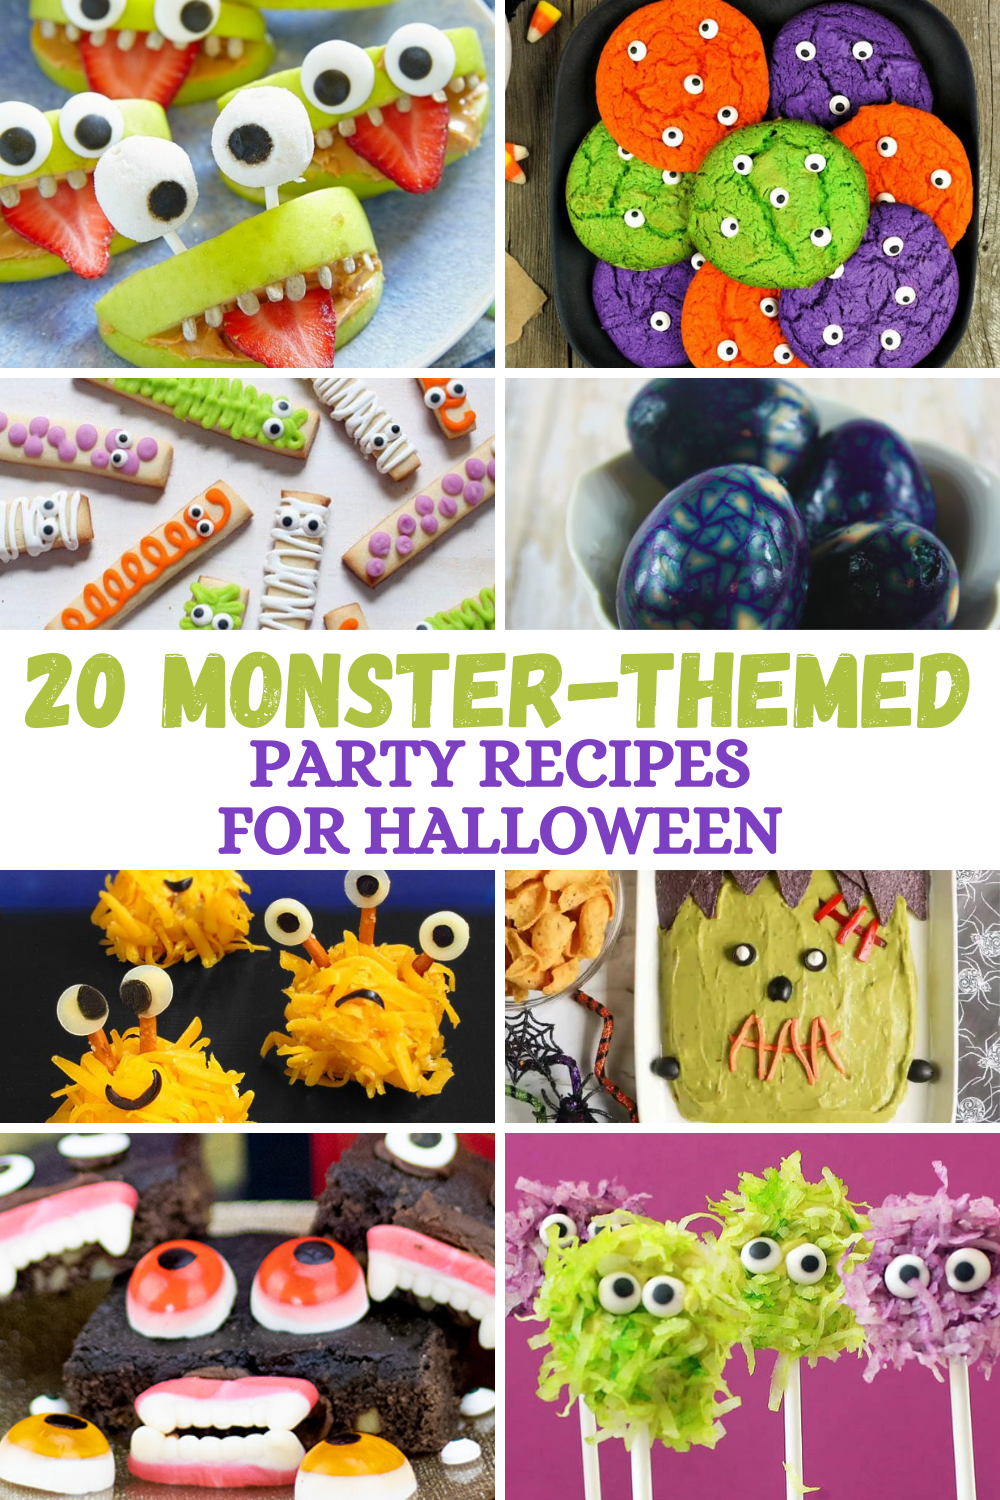 This is a compilation image showing a selection of monster-themed recipes and the words "20 monster-themed party recipes for Halloween."